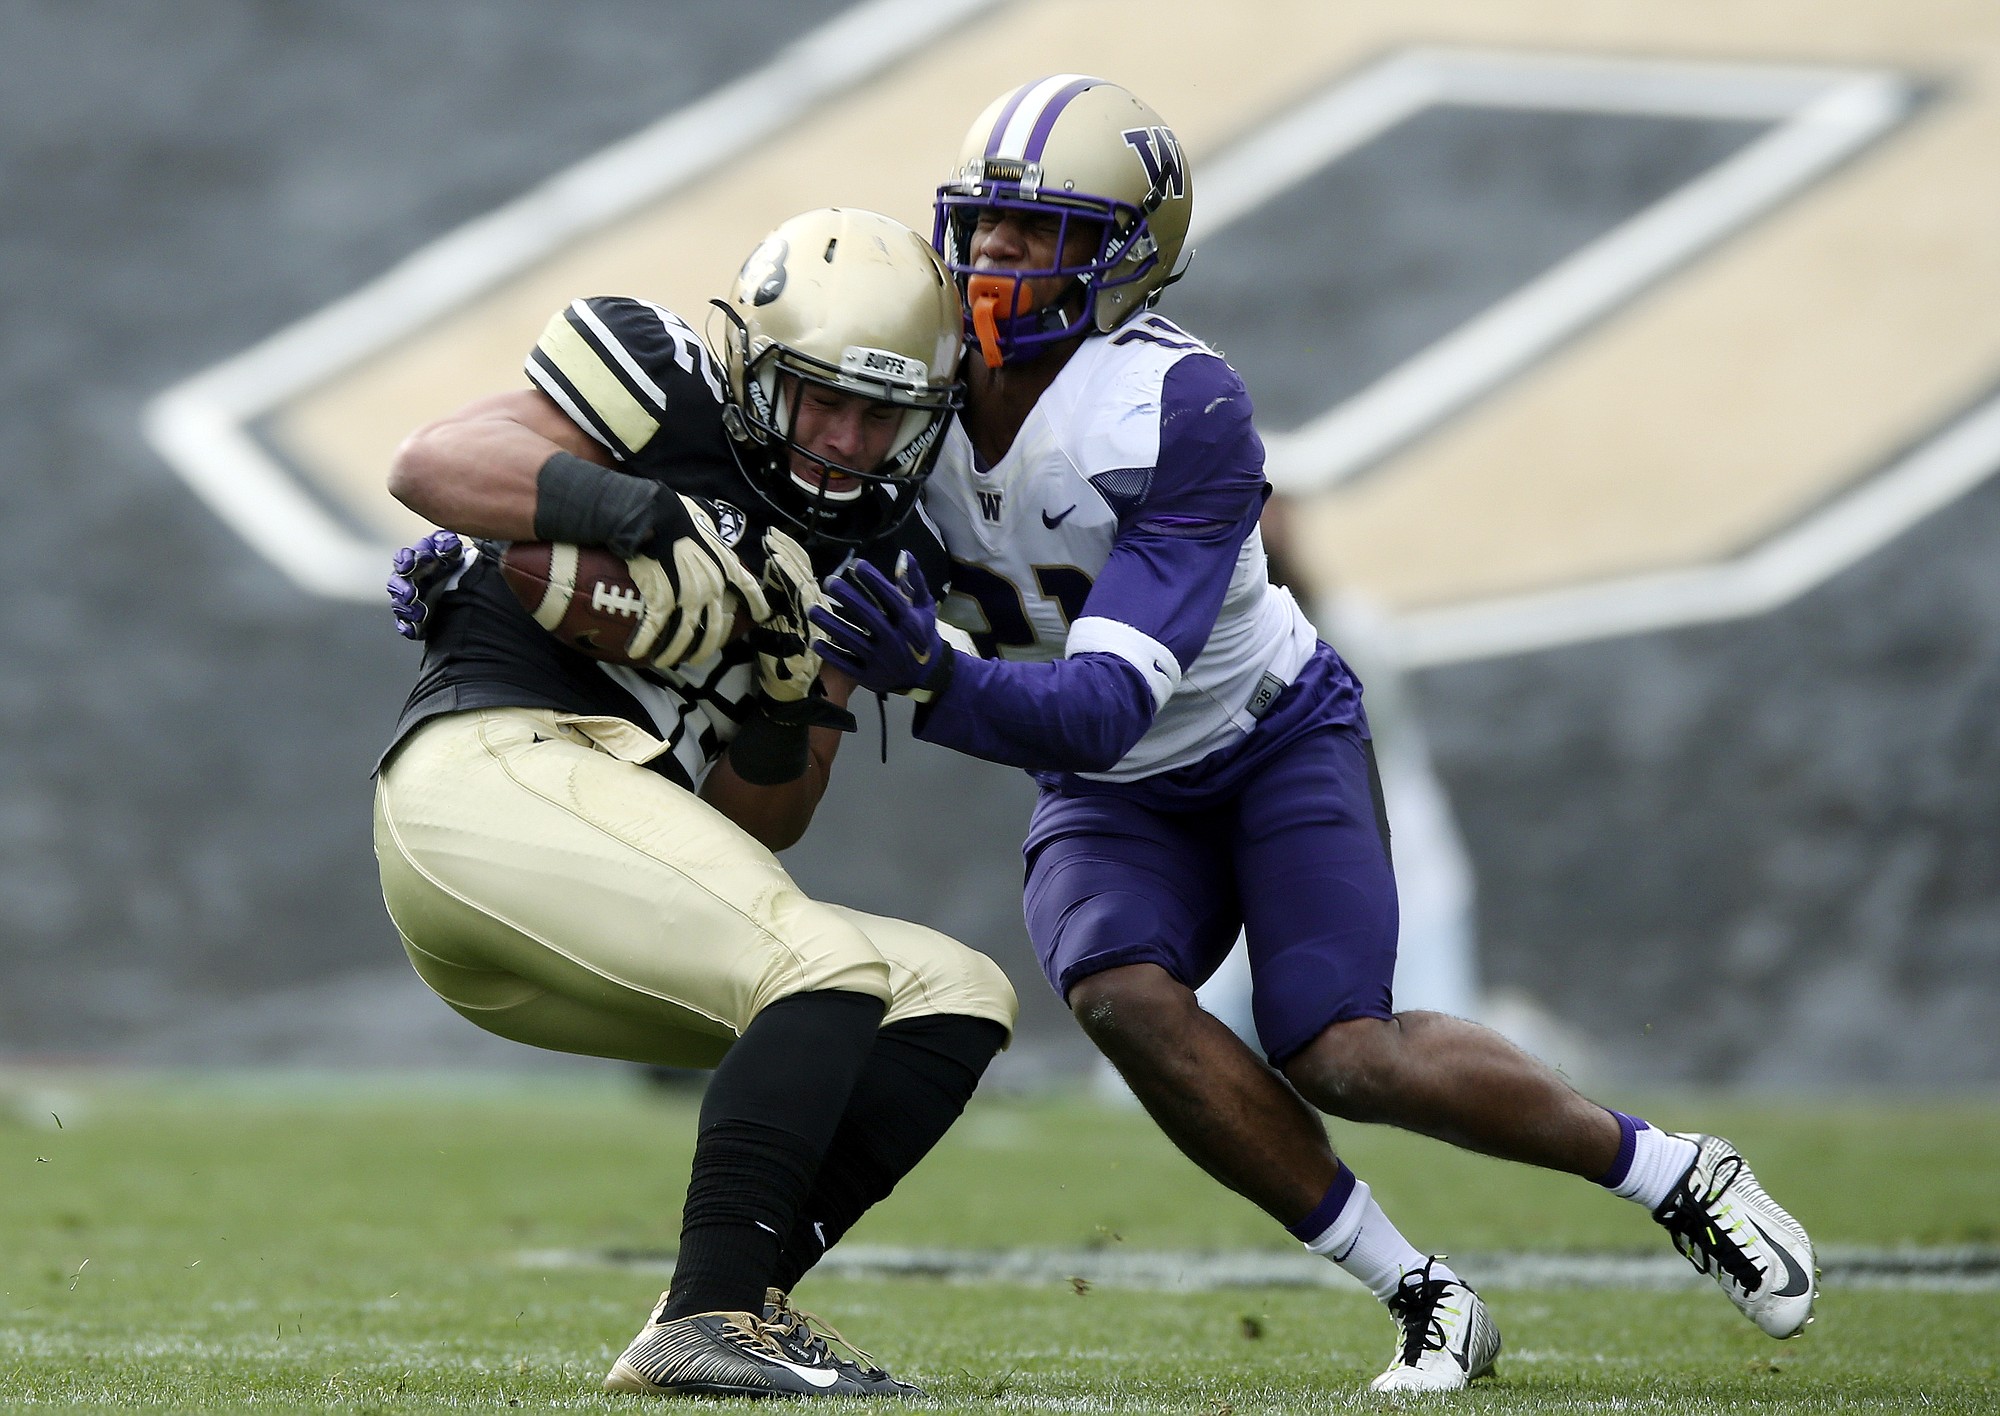 Washington defensive back Marcus Peters, left, tackles Colorado wide receiver Nelson Spruce during a game Saturday, Nov. 1, 2014. Peters has since been dismissed from the Huskies.